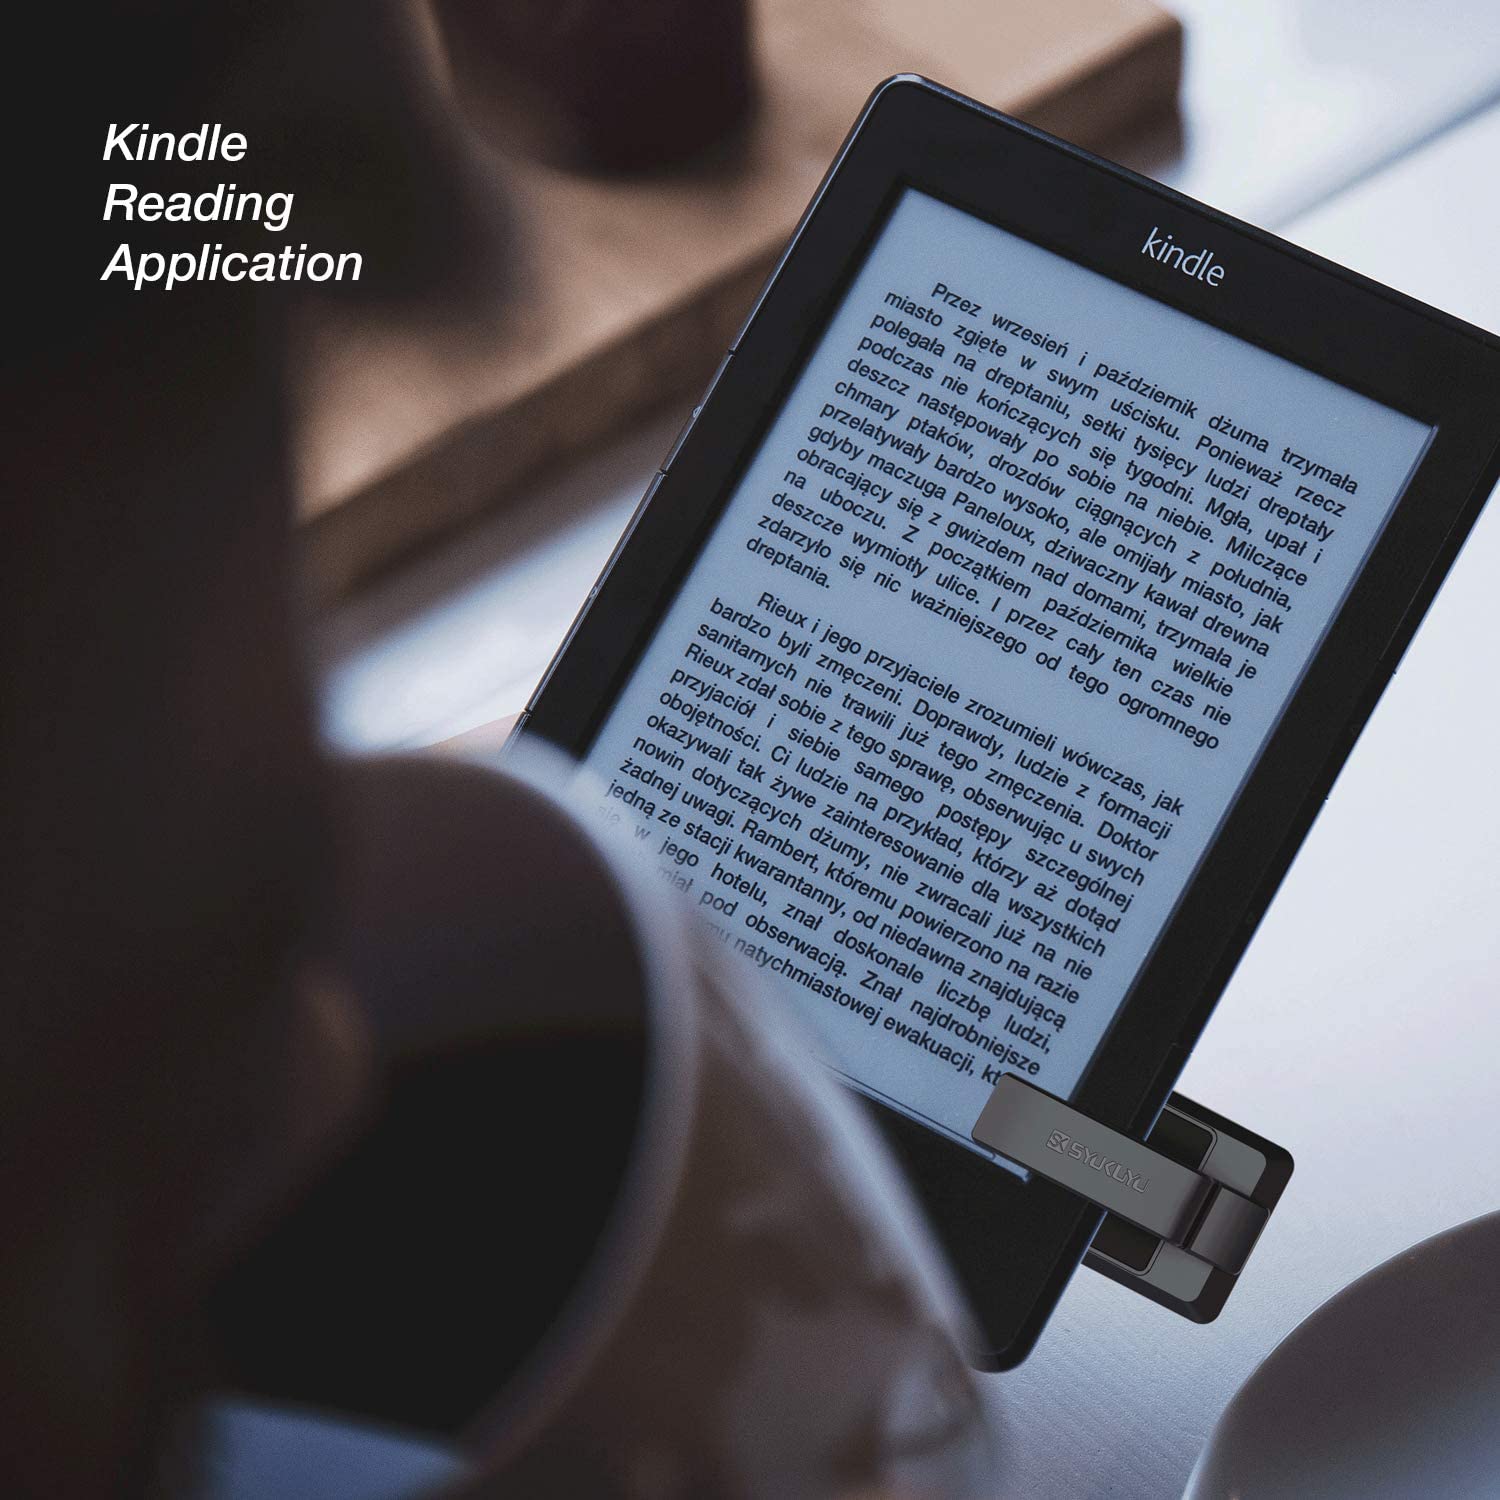 Do you like page-turn buttons on e-readers? - Good e-Reader